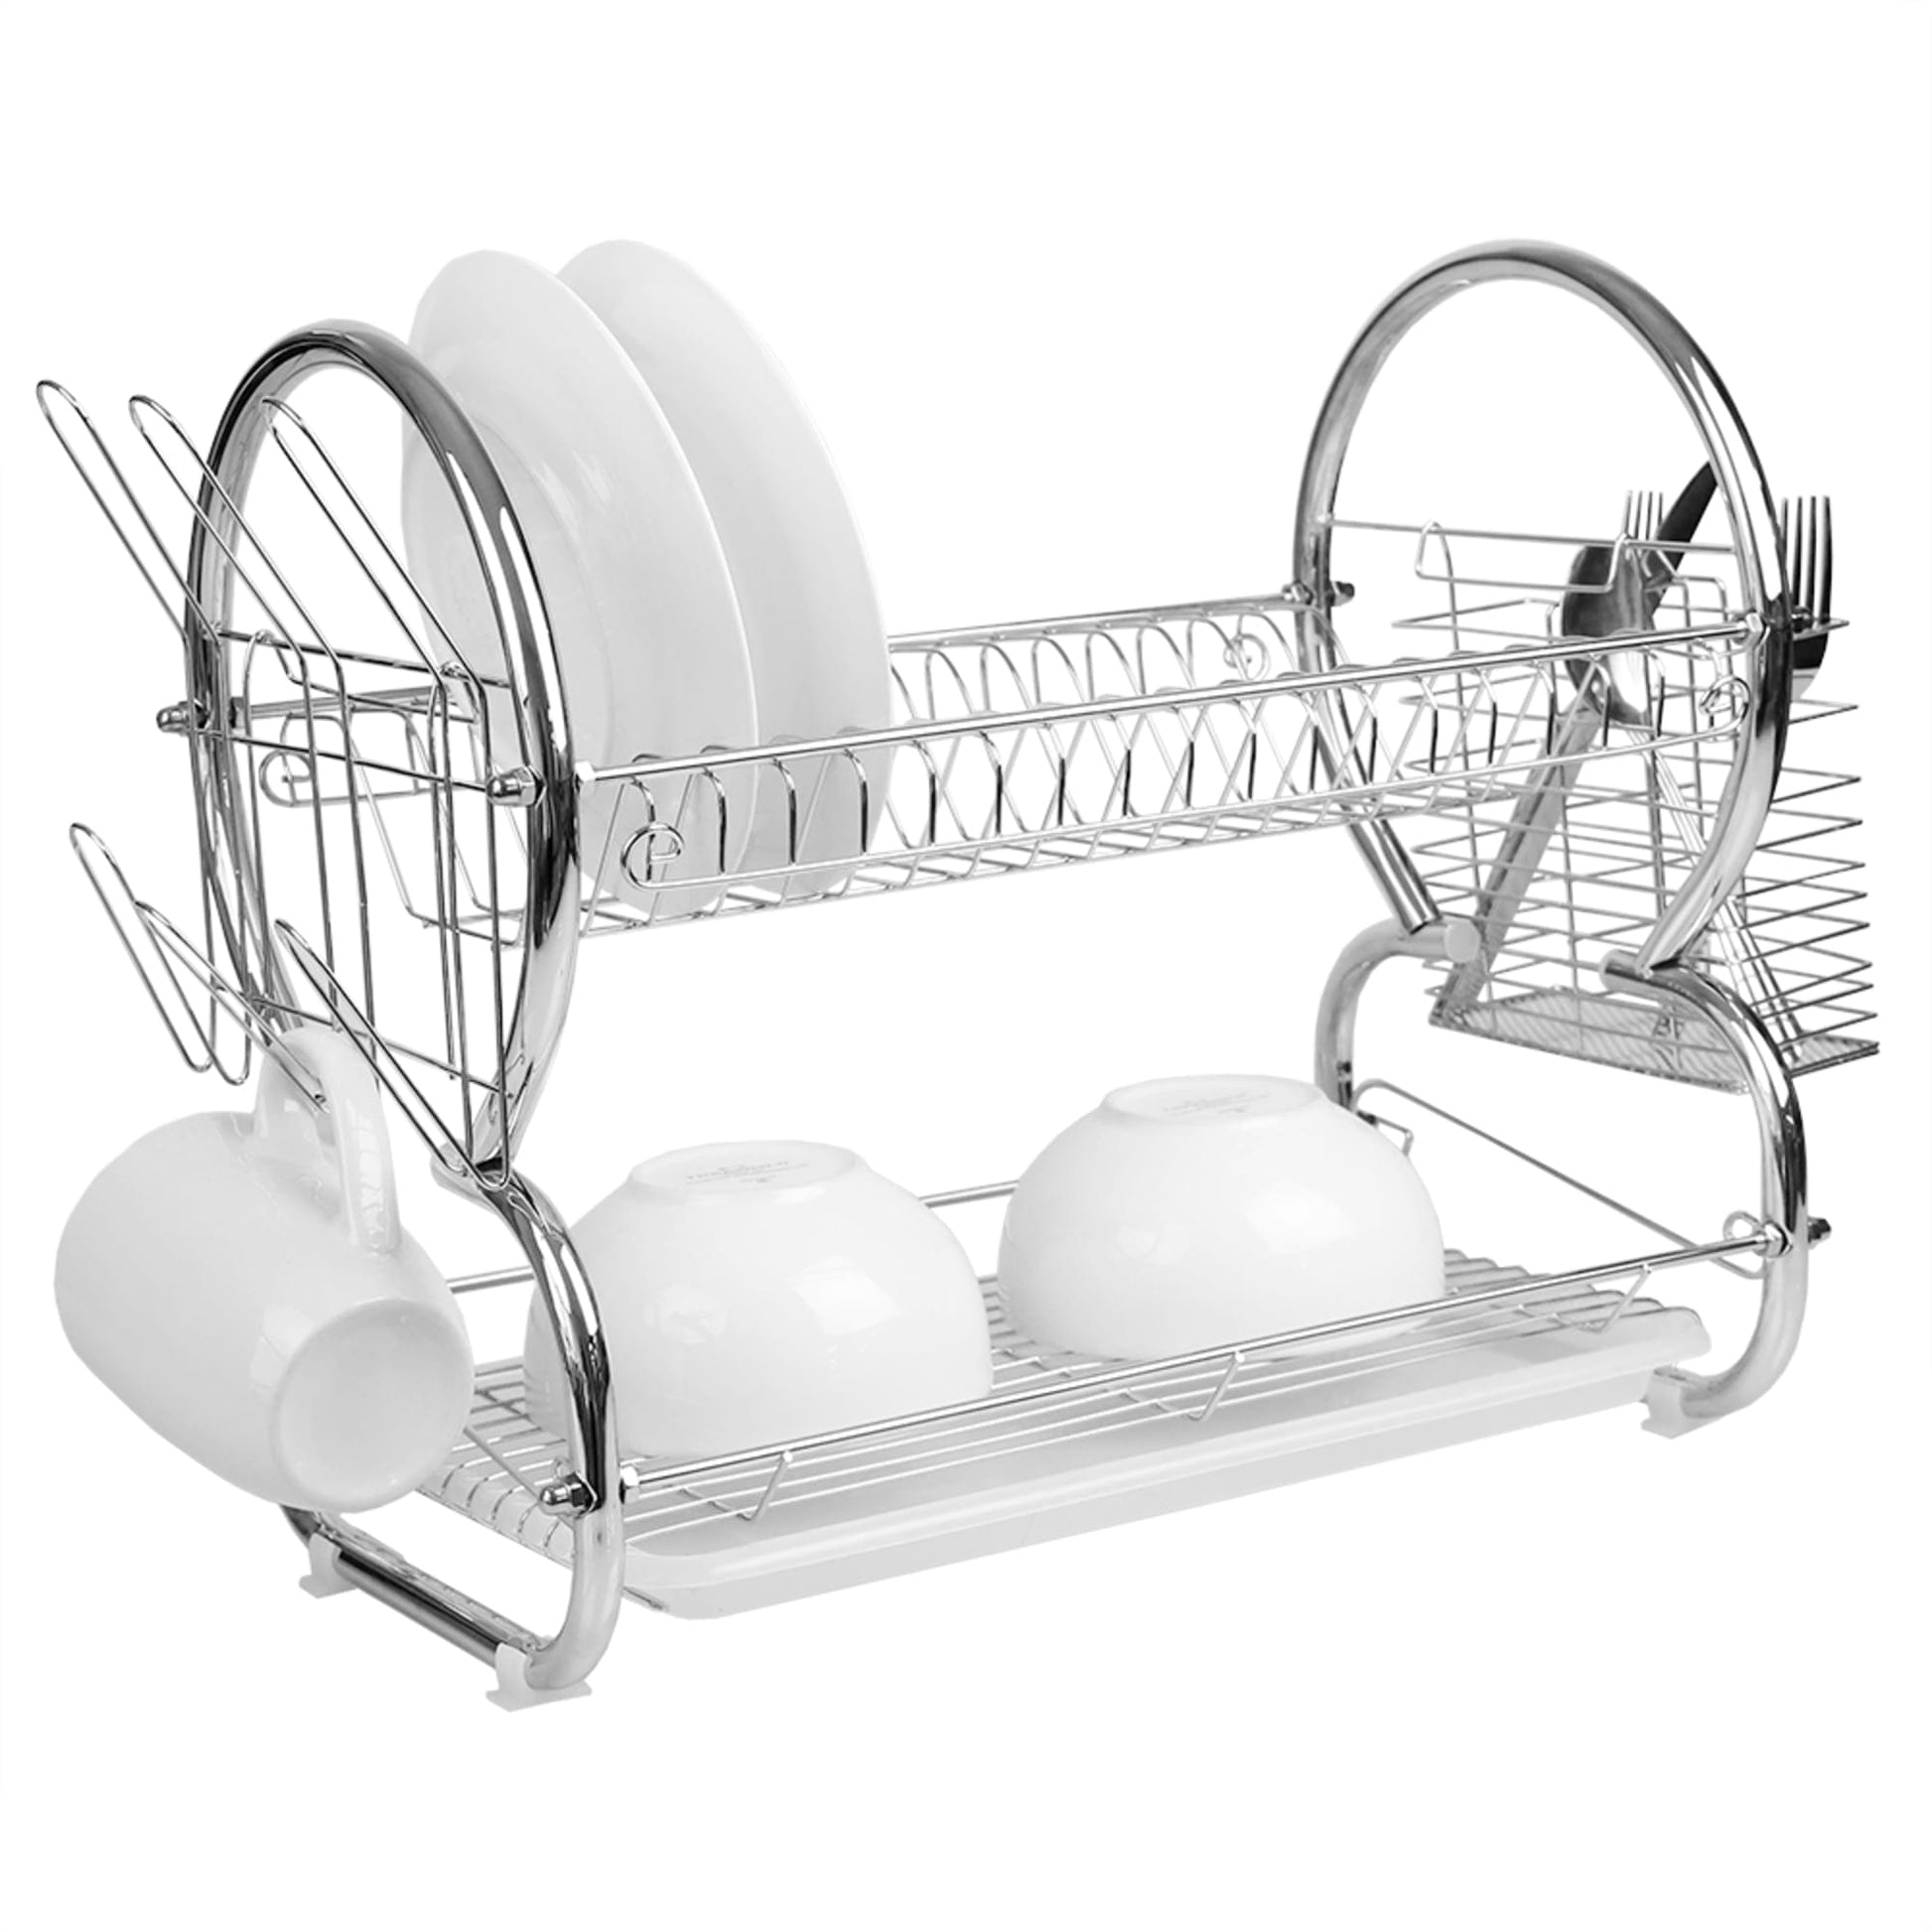 Over The Sink Dish Drying Rack Stainless Steel 2 Tier Durable Dish Drainer  Black